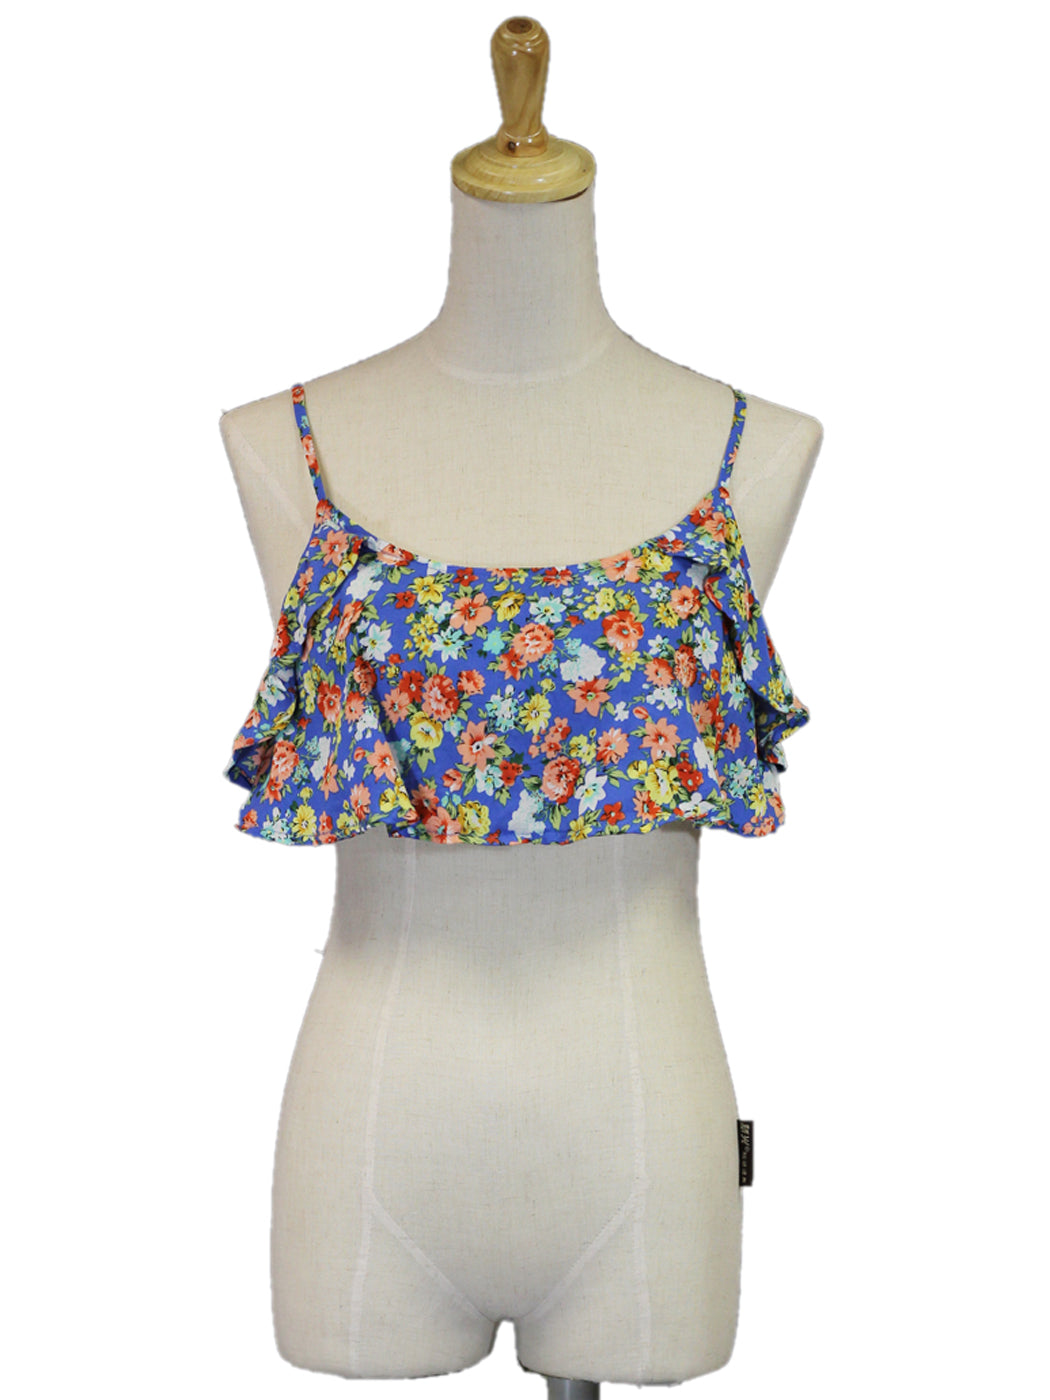 Cotton Candy USA Cropped Floral Printed Ruffled Top With Tie Back Closure - ALILANG.COM